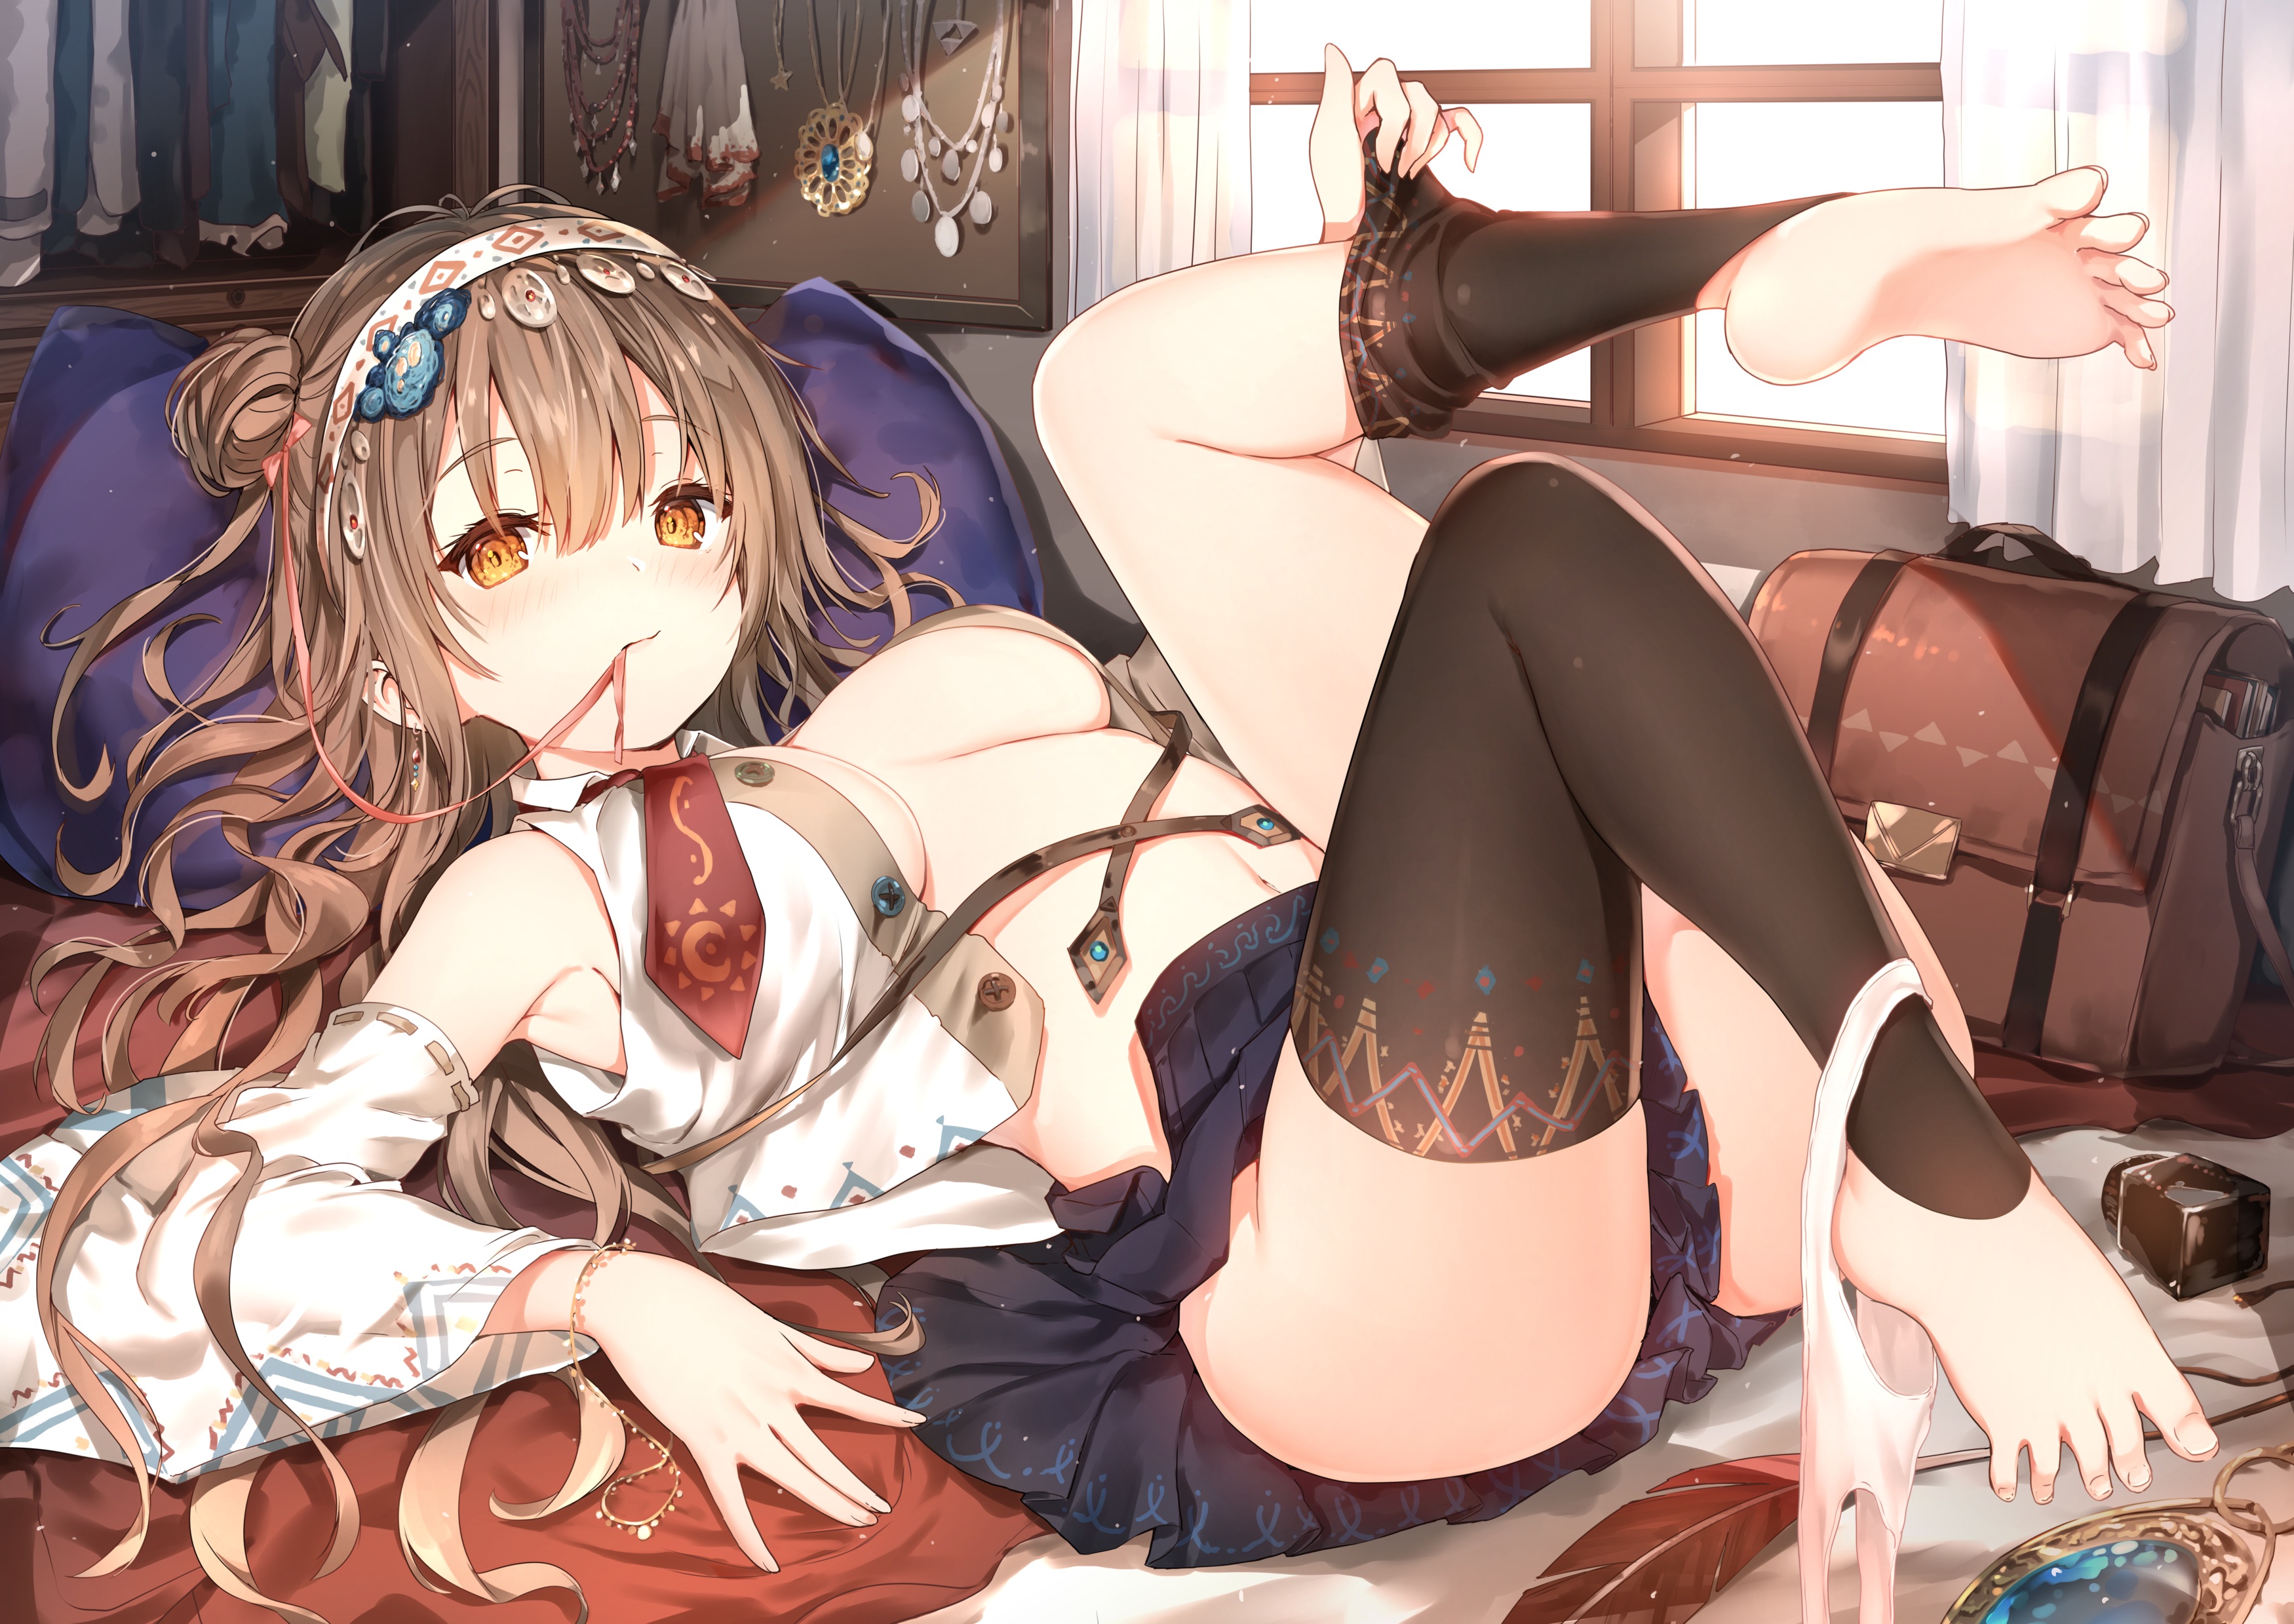 Anime 3500x2478 anime anime girls Sune artwork brunette brown eyes lying on back in bed open shirt no bra underboob legs up panties to the side feet panties barefoot thighs